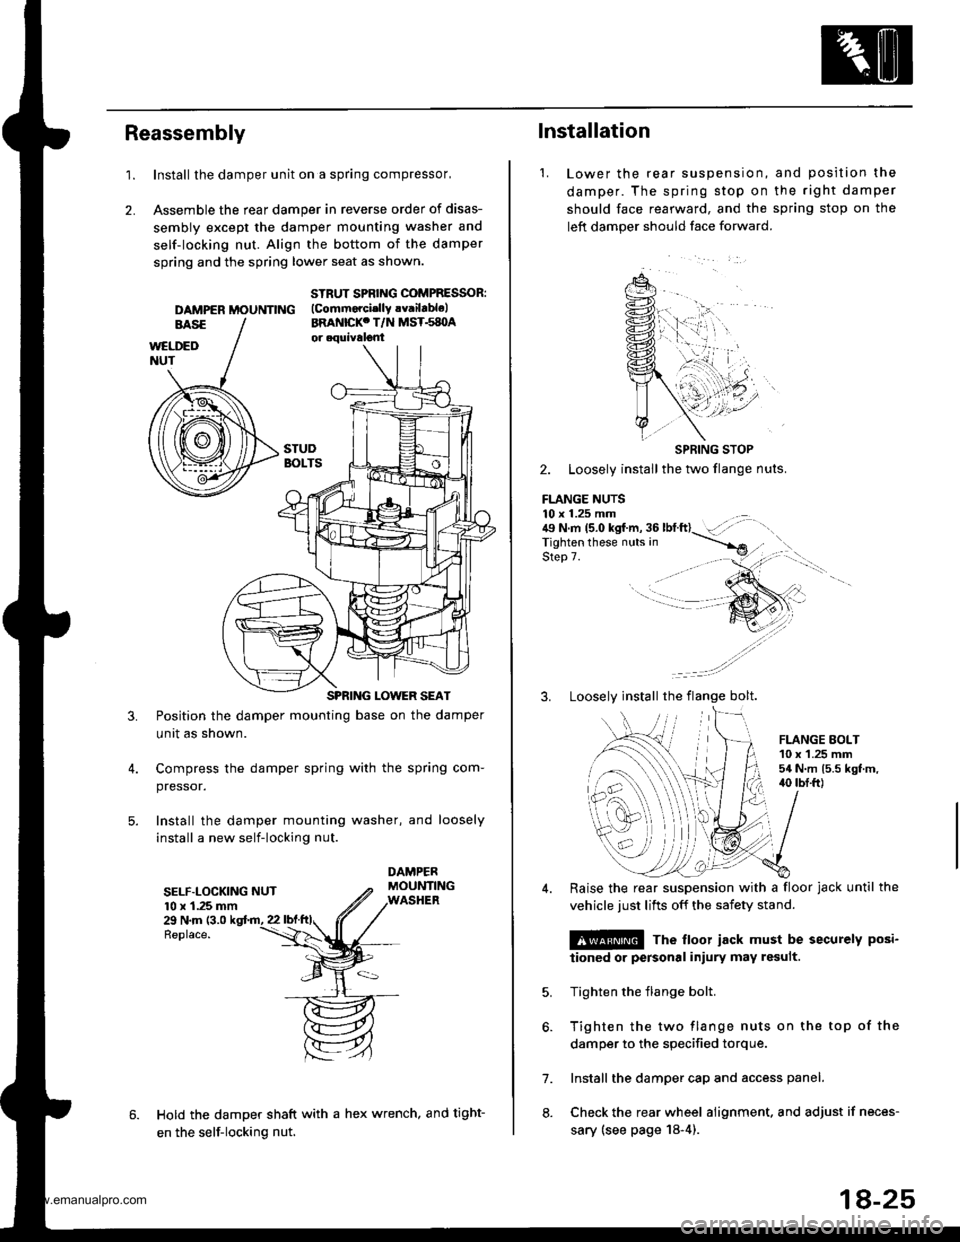 HONDA CR-V 2000 RD1-RD3 / 1.G Workshop Manual 
Reassembly
1.Install the damper unit on a spring compressor,
Assemble the rear damper in reverse order of disas-
sembly except the damper mounting washer and
self-locking nut. Align the bottom of the